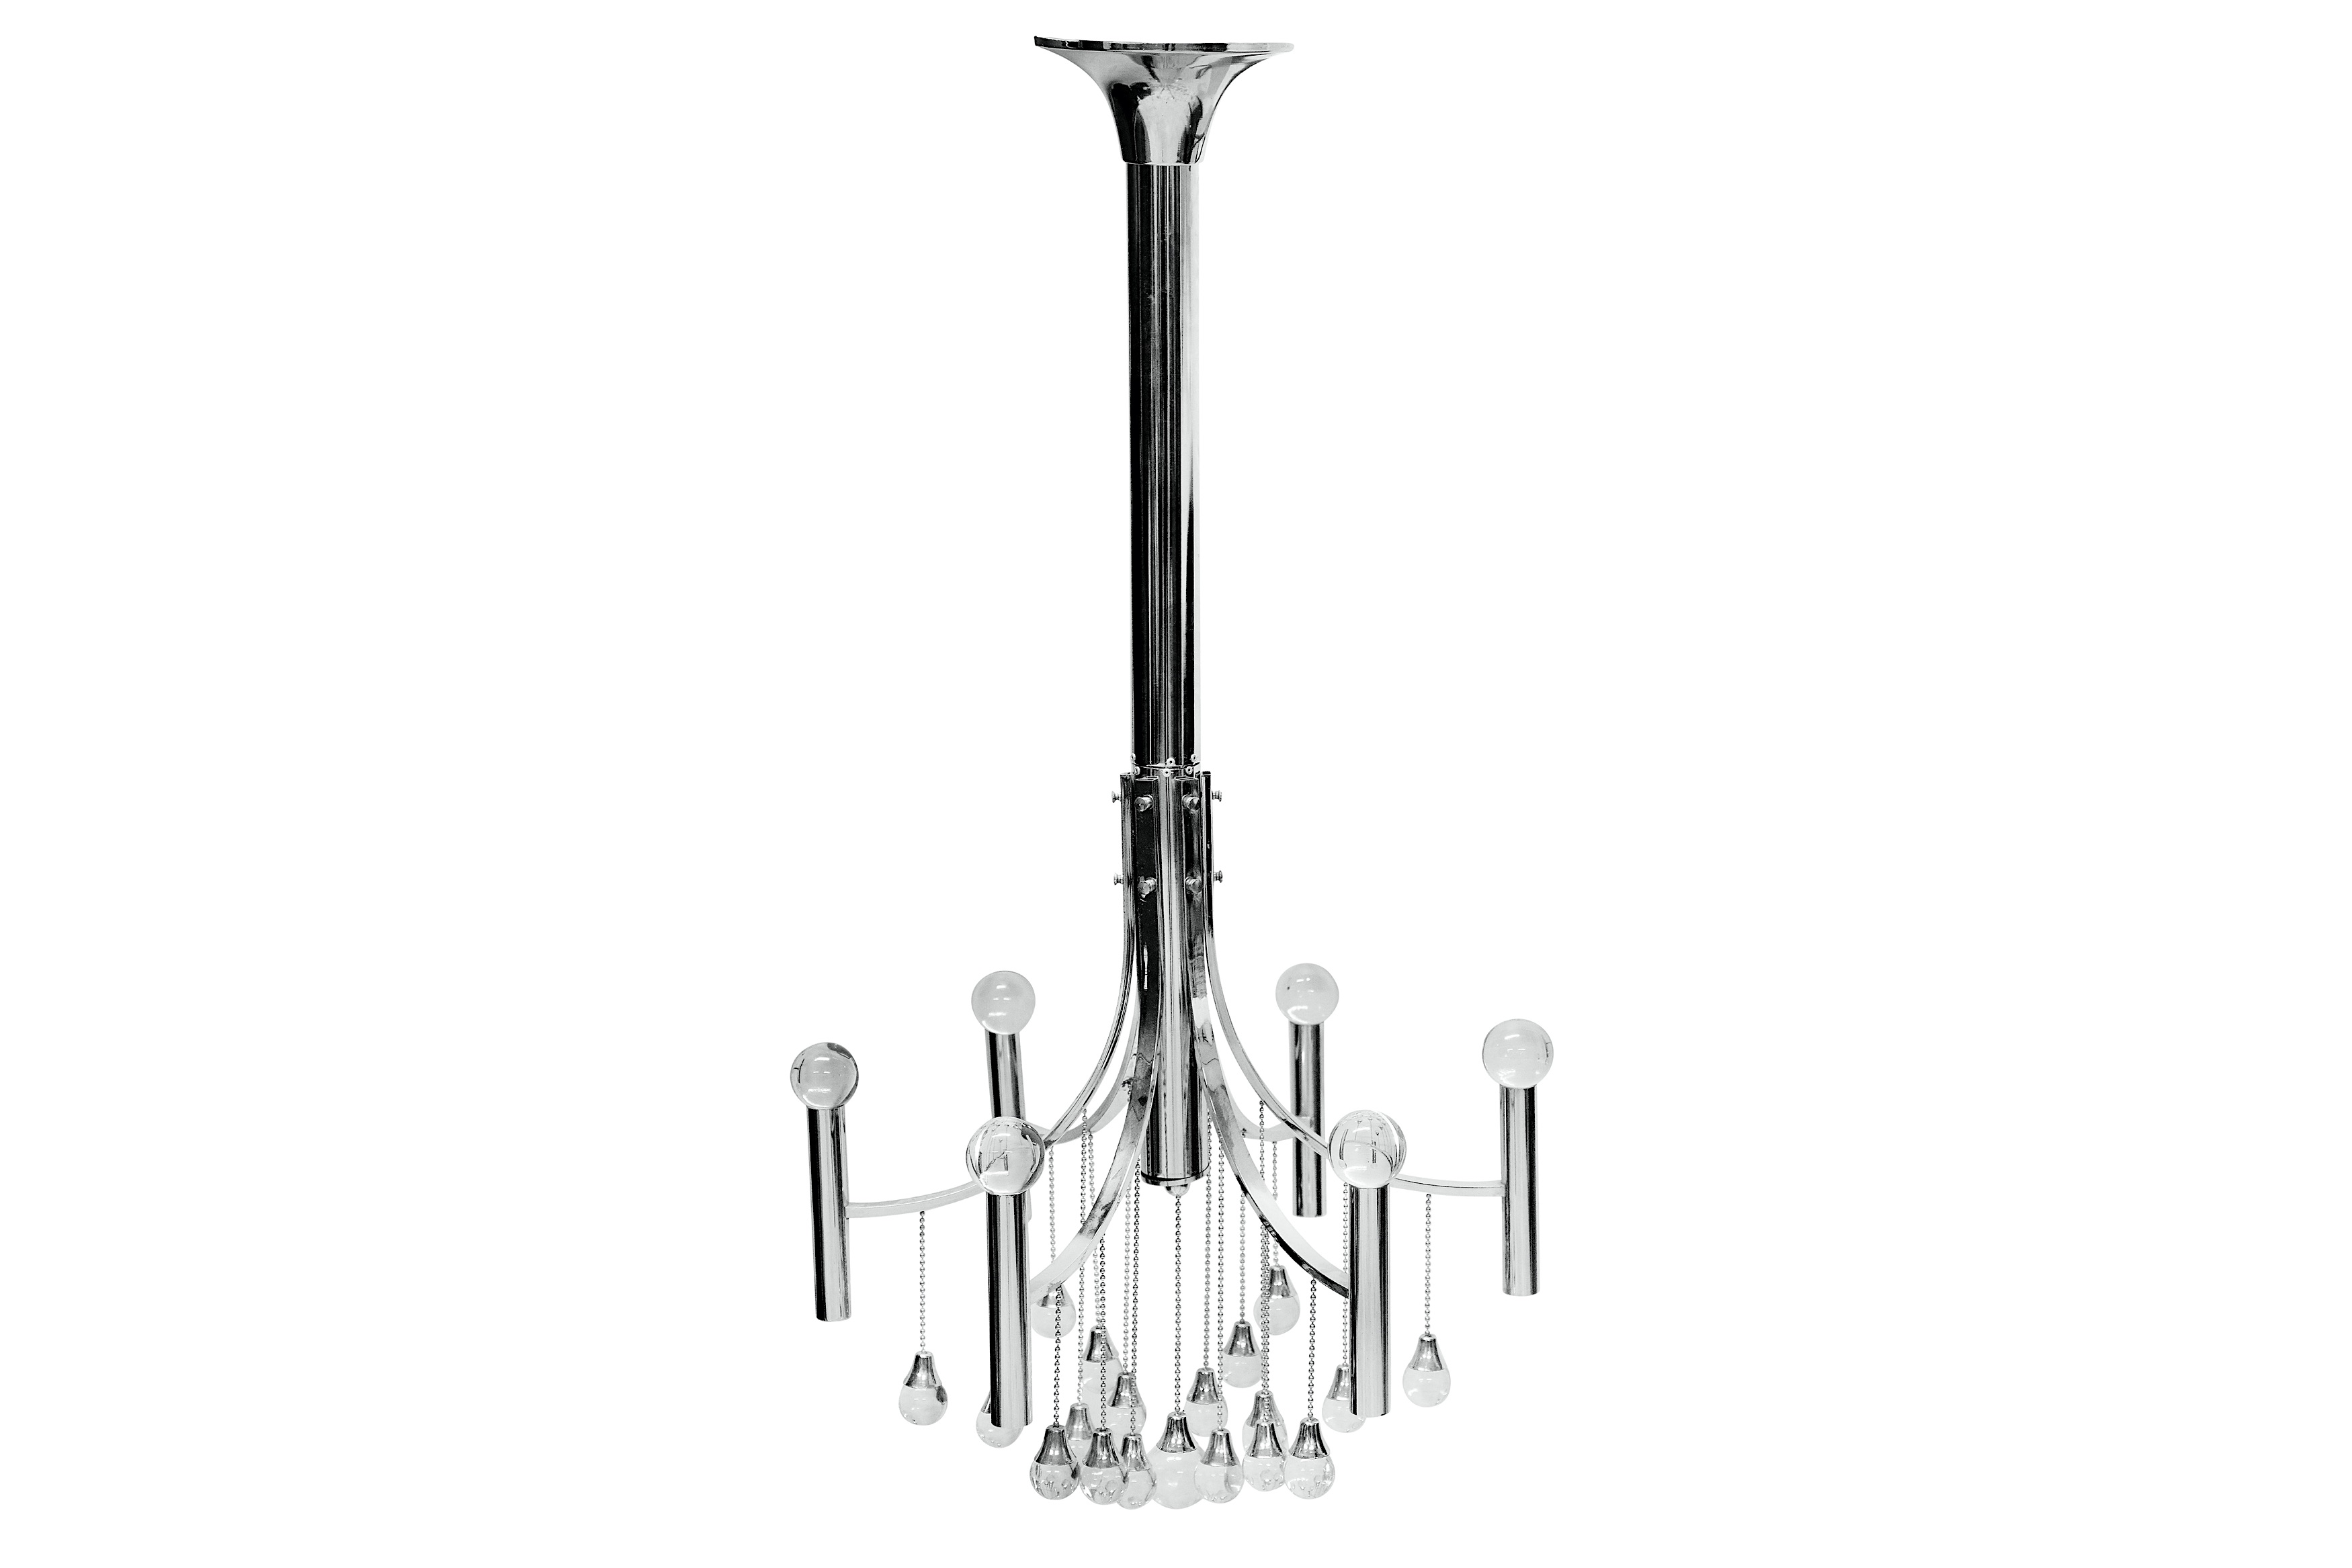 GAETANO SCIOLARI, ITALY: A chandelier, late 60's early 70's, chromed steel, glass, the cylindrical